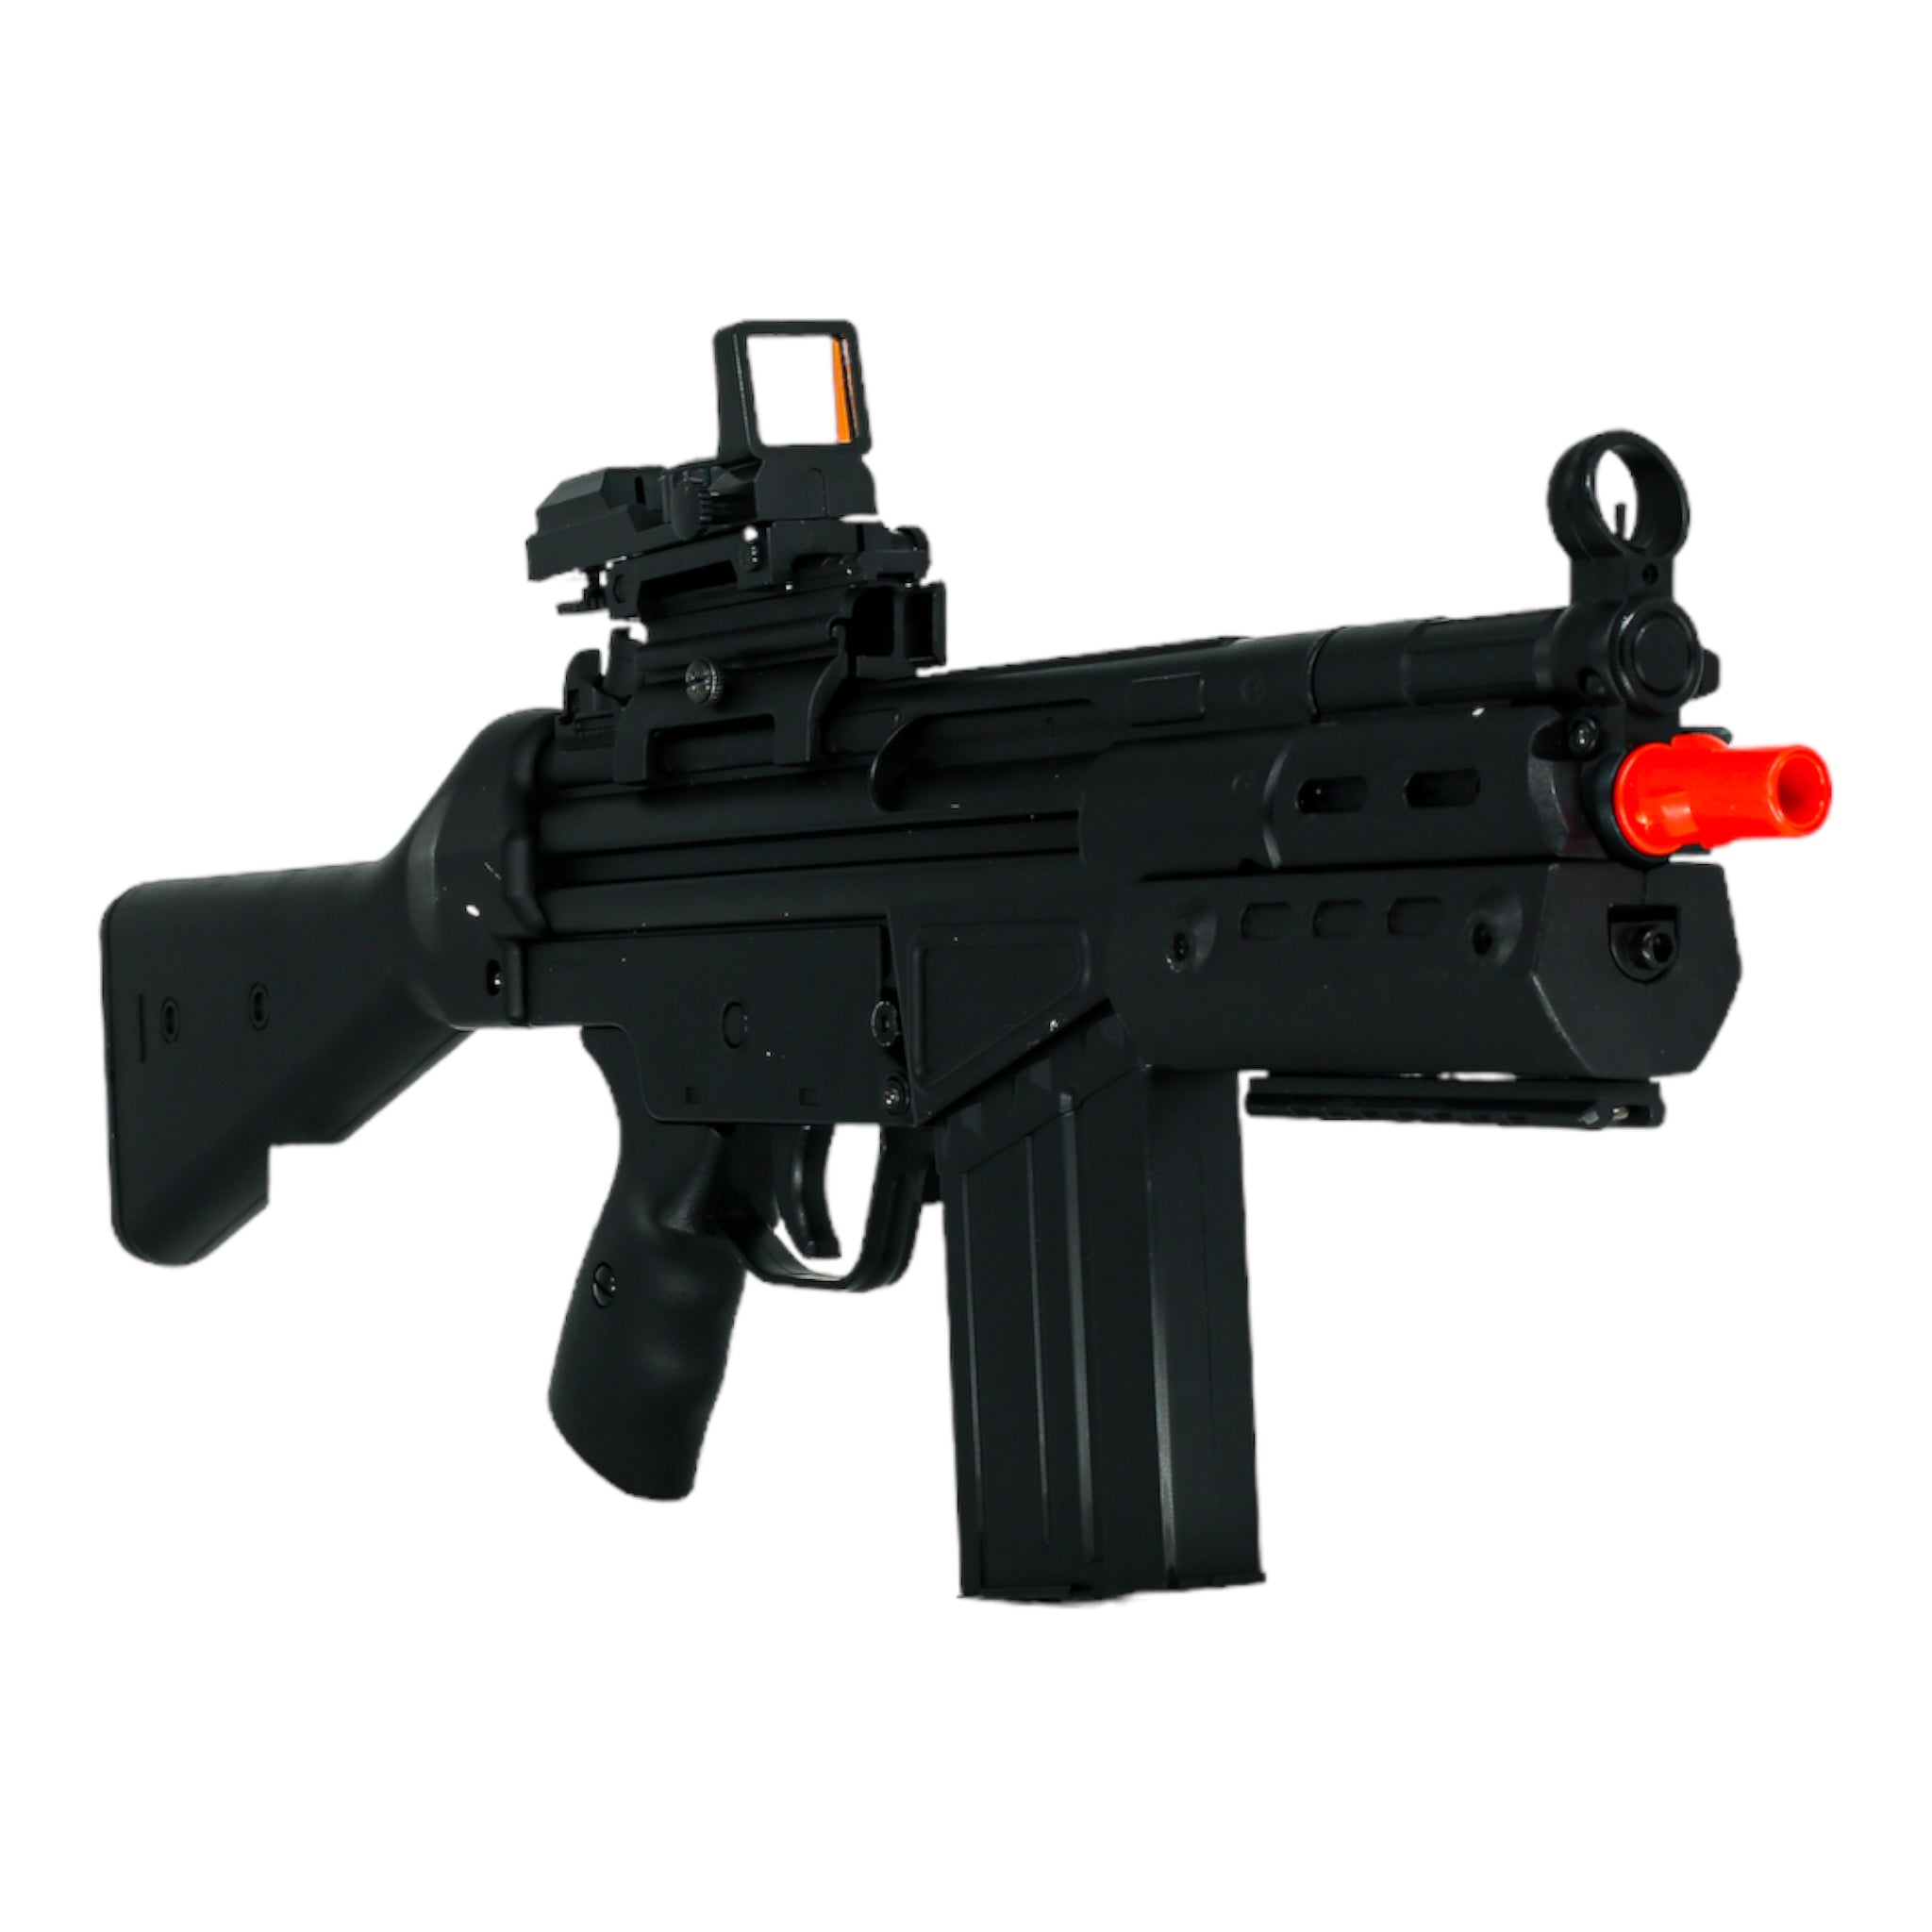 Pre-Owned Wellfire R8 w/ Battery & Scope - ssairsoft.com